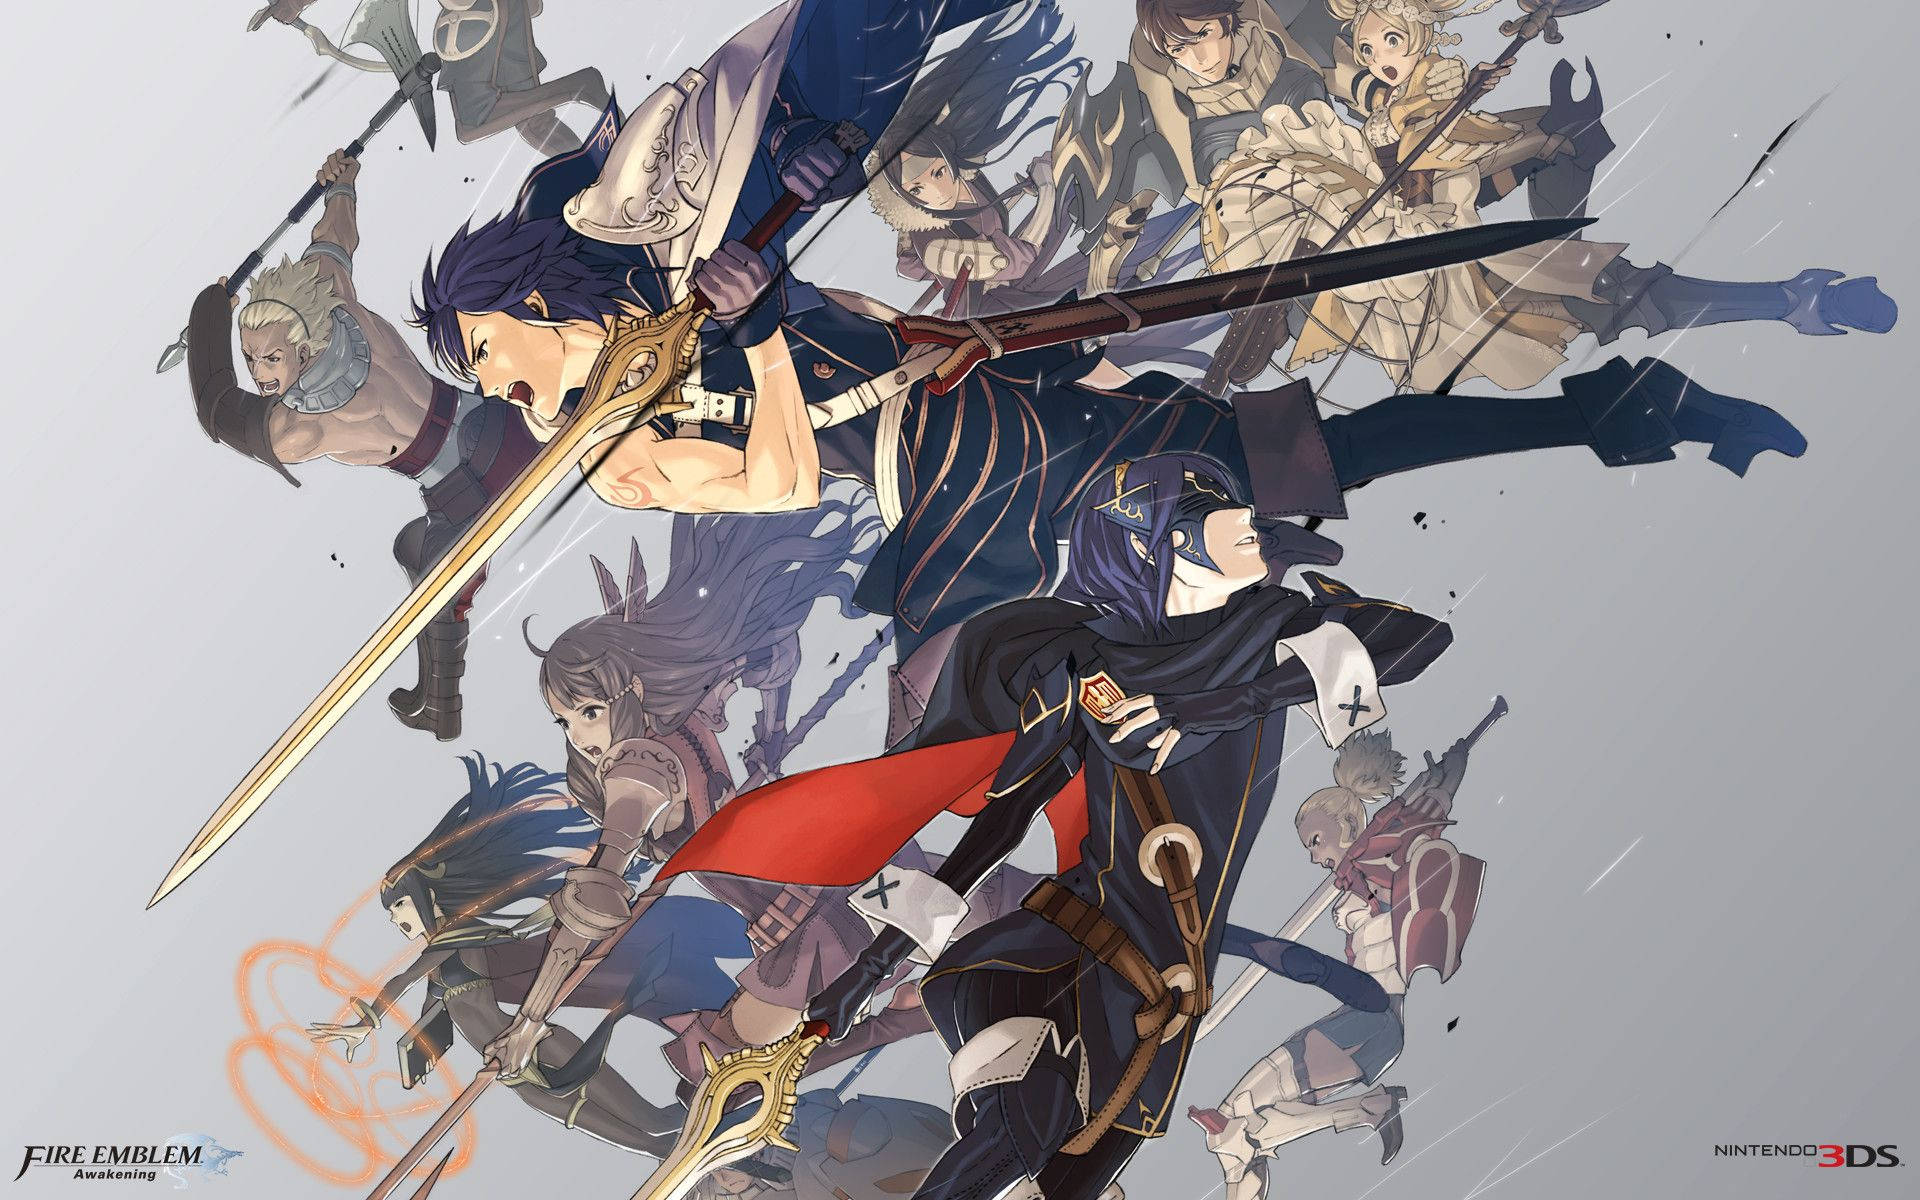 Step into the battlefield with the heroes of Fire Emblem Wallpaper